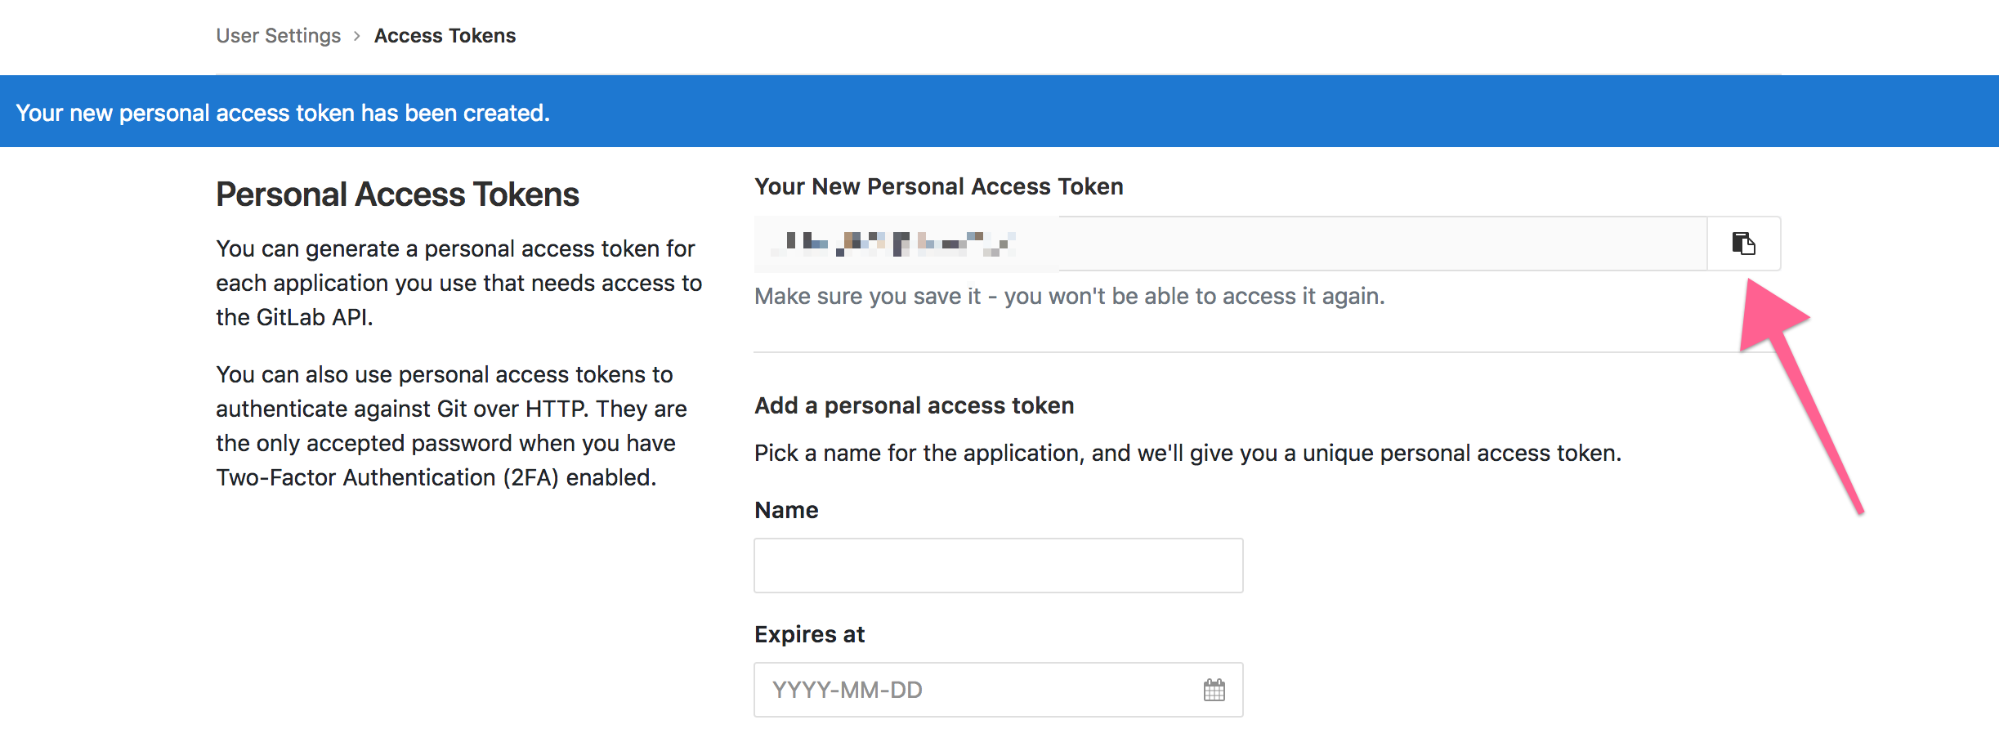 Copy the newly created Personal Access Token